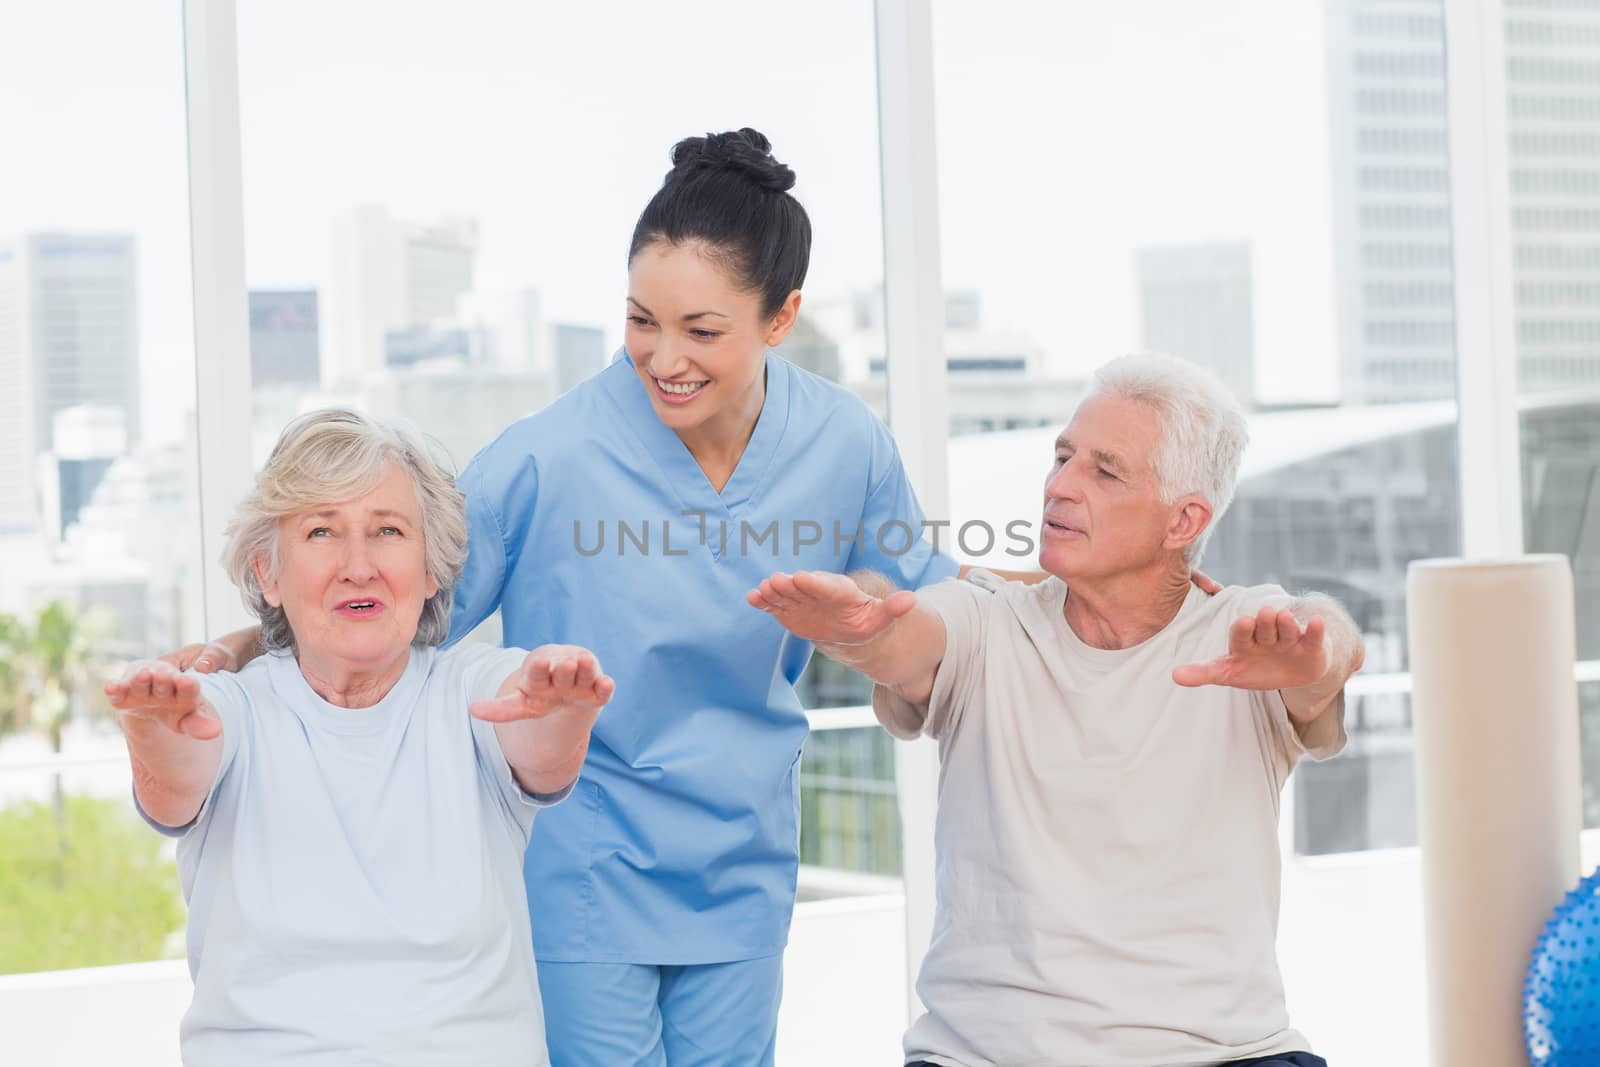 Trainer assisting senior couple to exercise by Wavebreakmedia